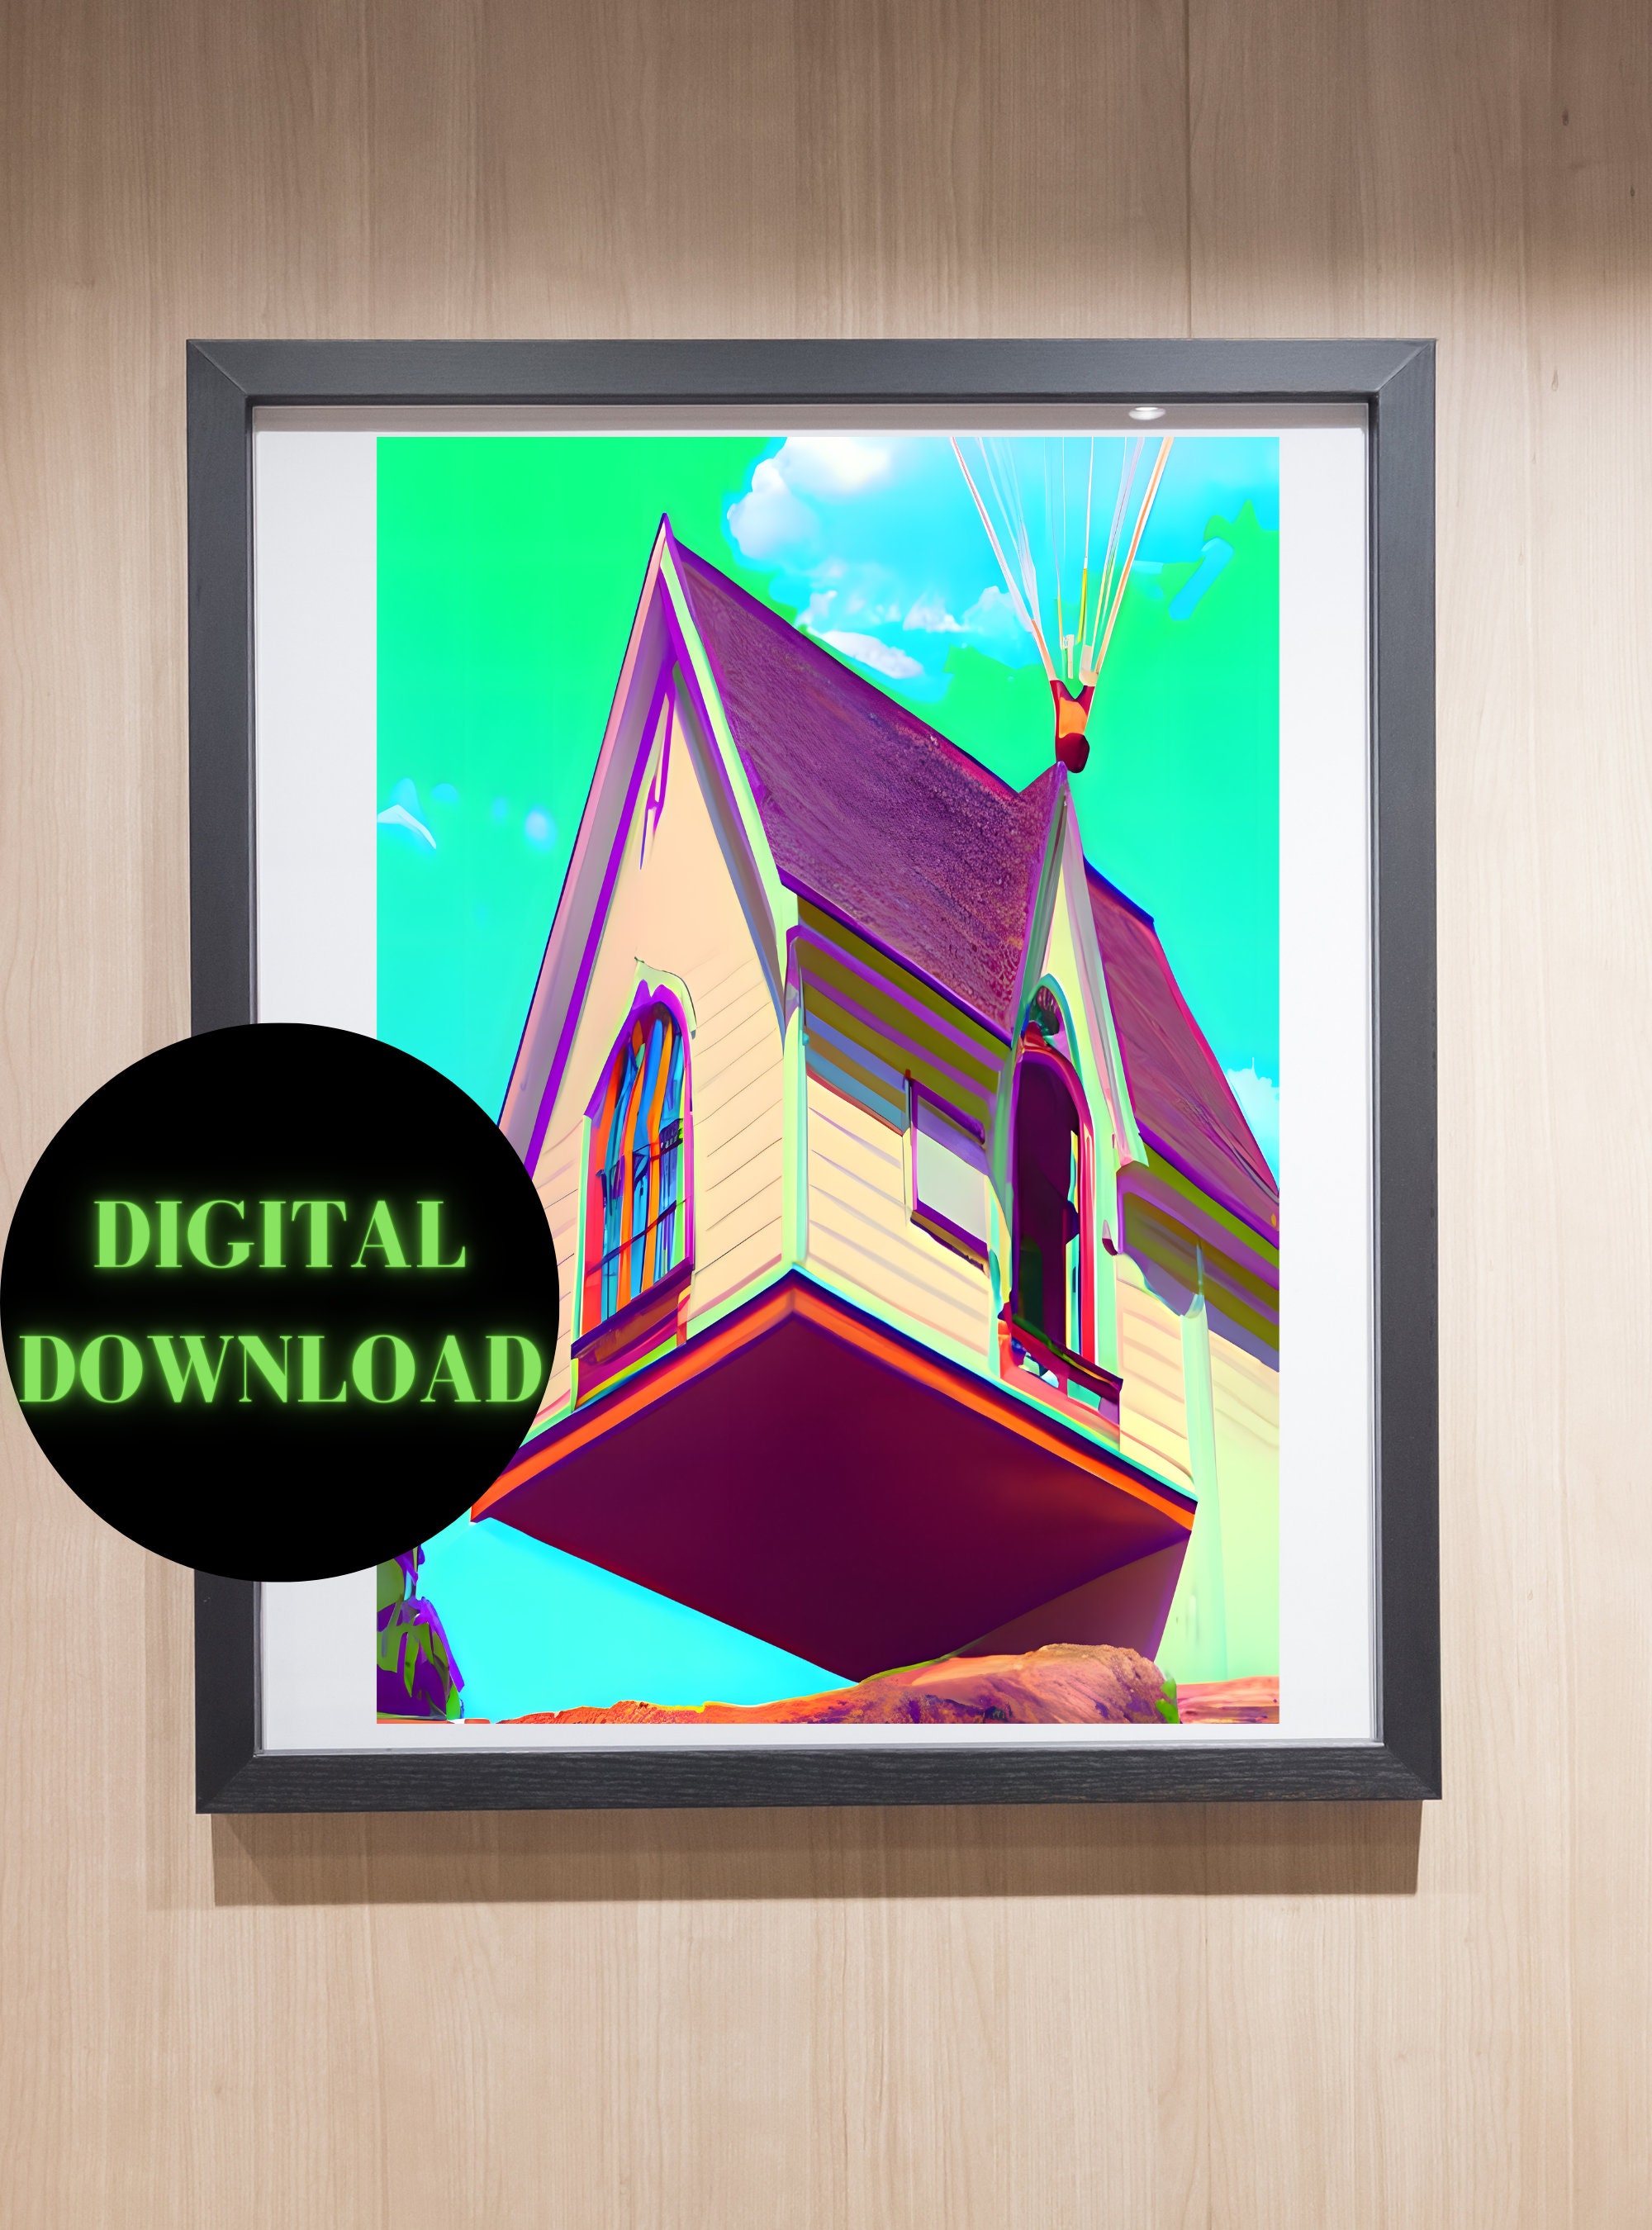 Dreamcore Flying House Aesthetic Home Decor and Digital -  Finland